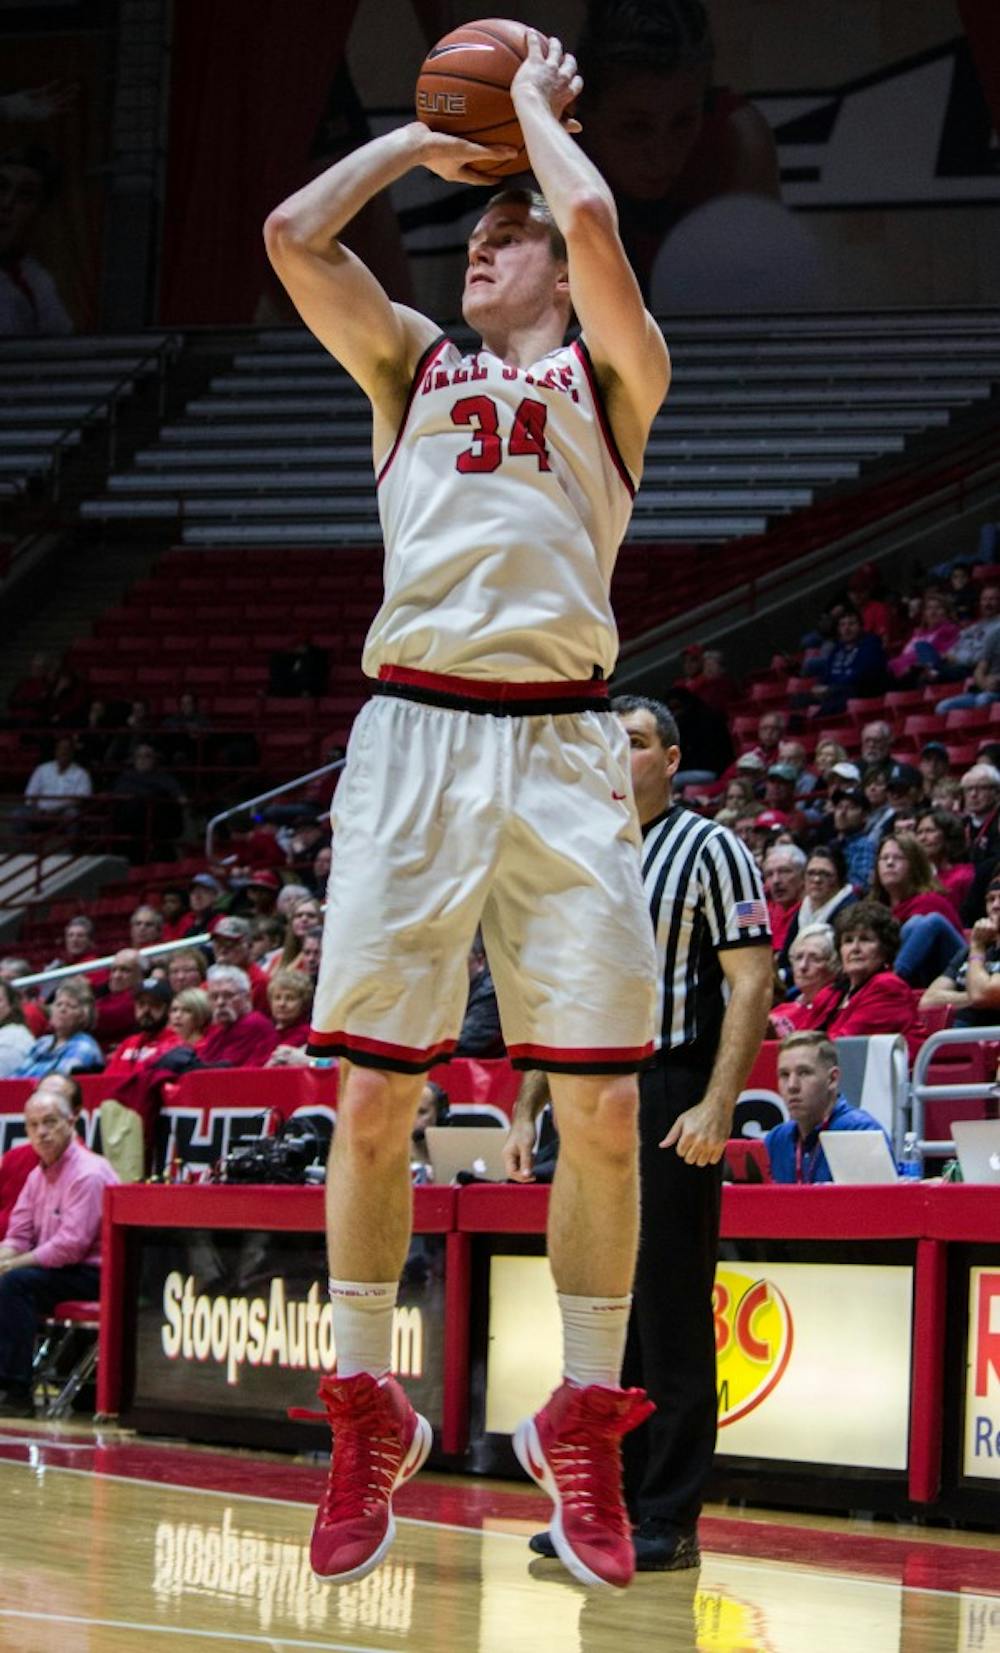 Ball State guard/forward Sean Sellers attempts to shoot a three-pointer during the game against Eastern Kentucky on Dec. 10 in Worthen Arena. Ball State won 91-86 in overtime. Grace Ramey // DN